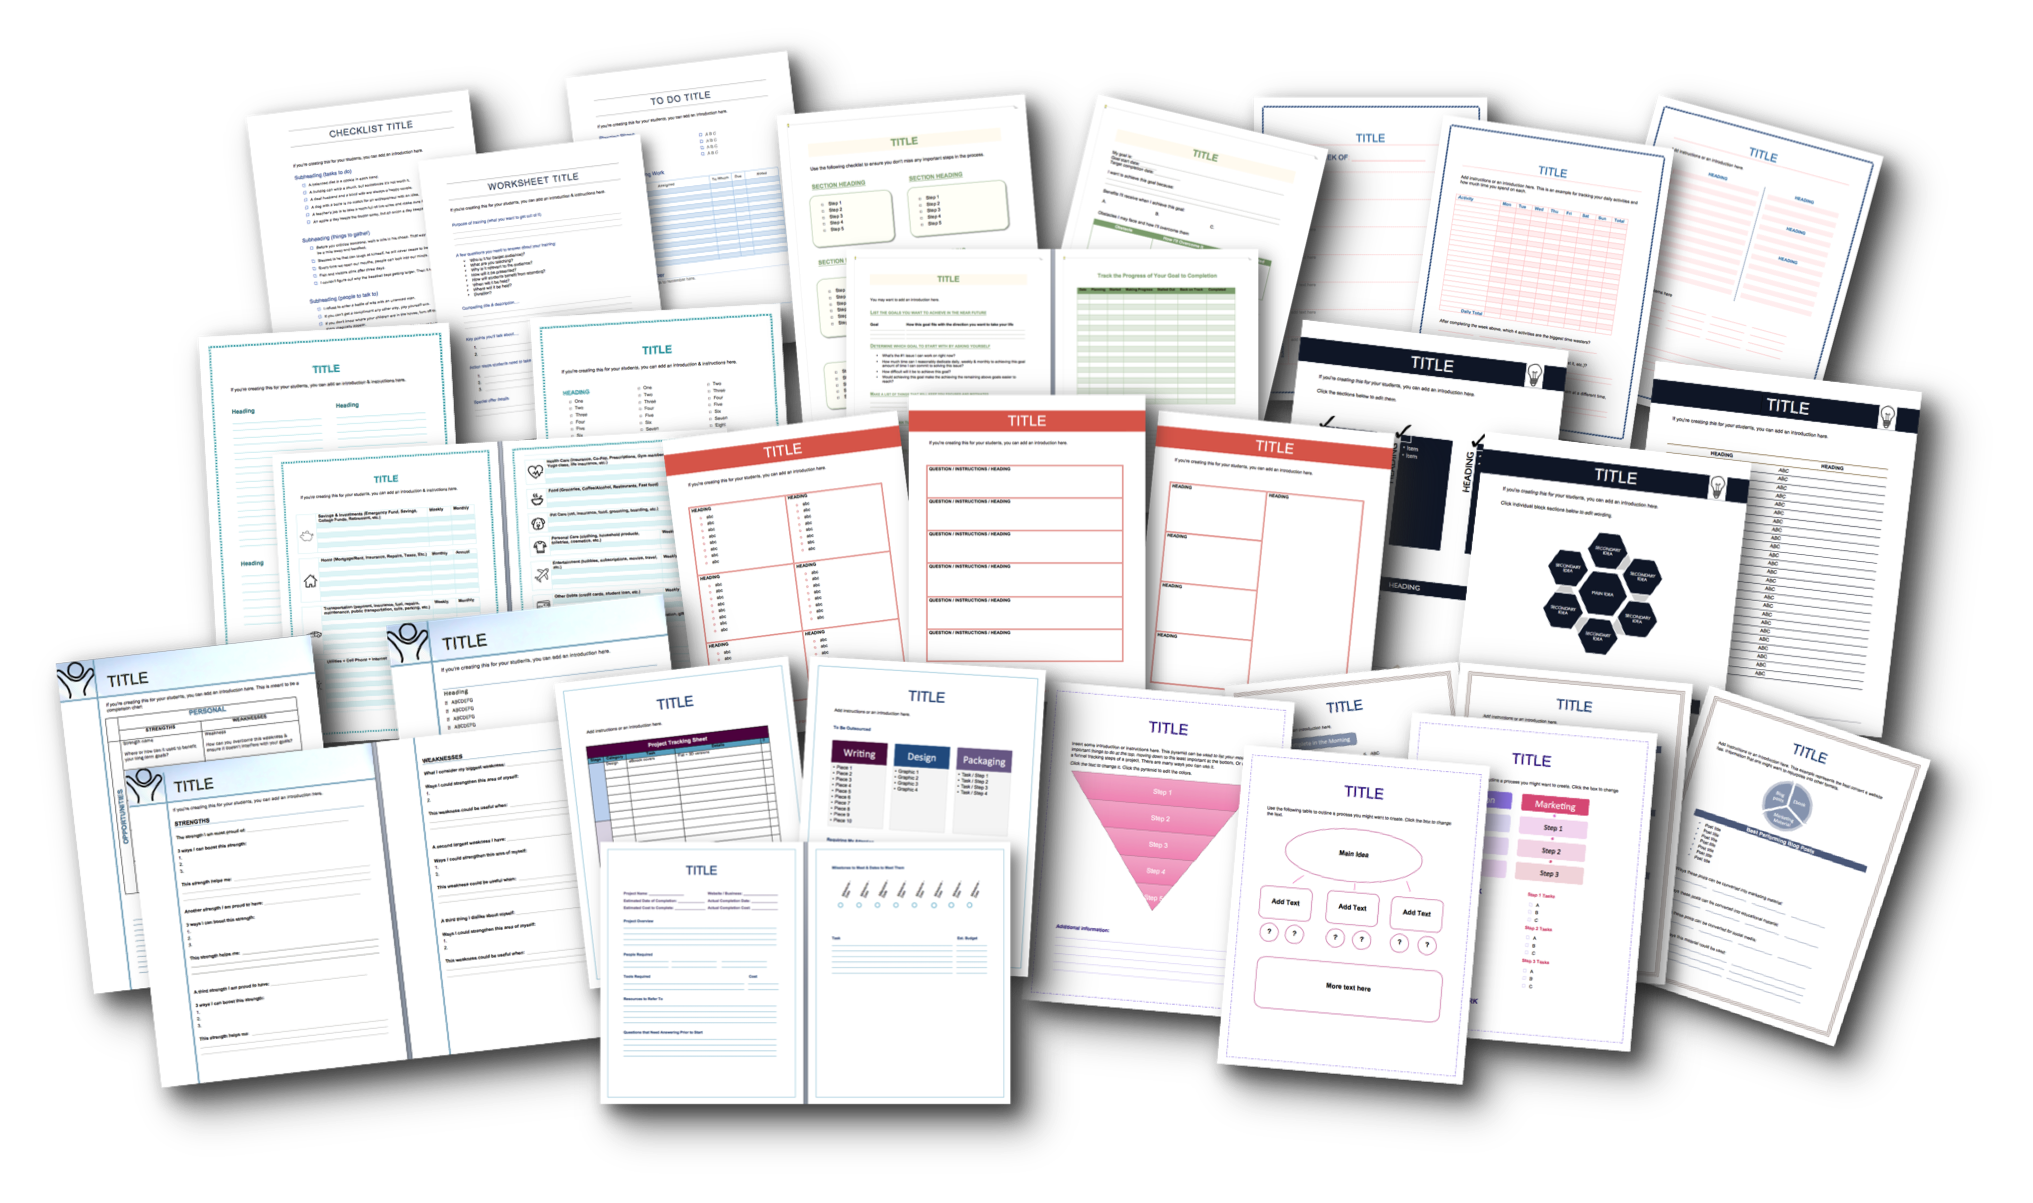 Give 500 Fill In The Blanks Marketing Templates 28 Packages